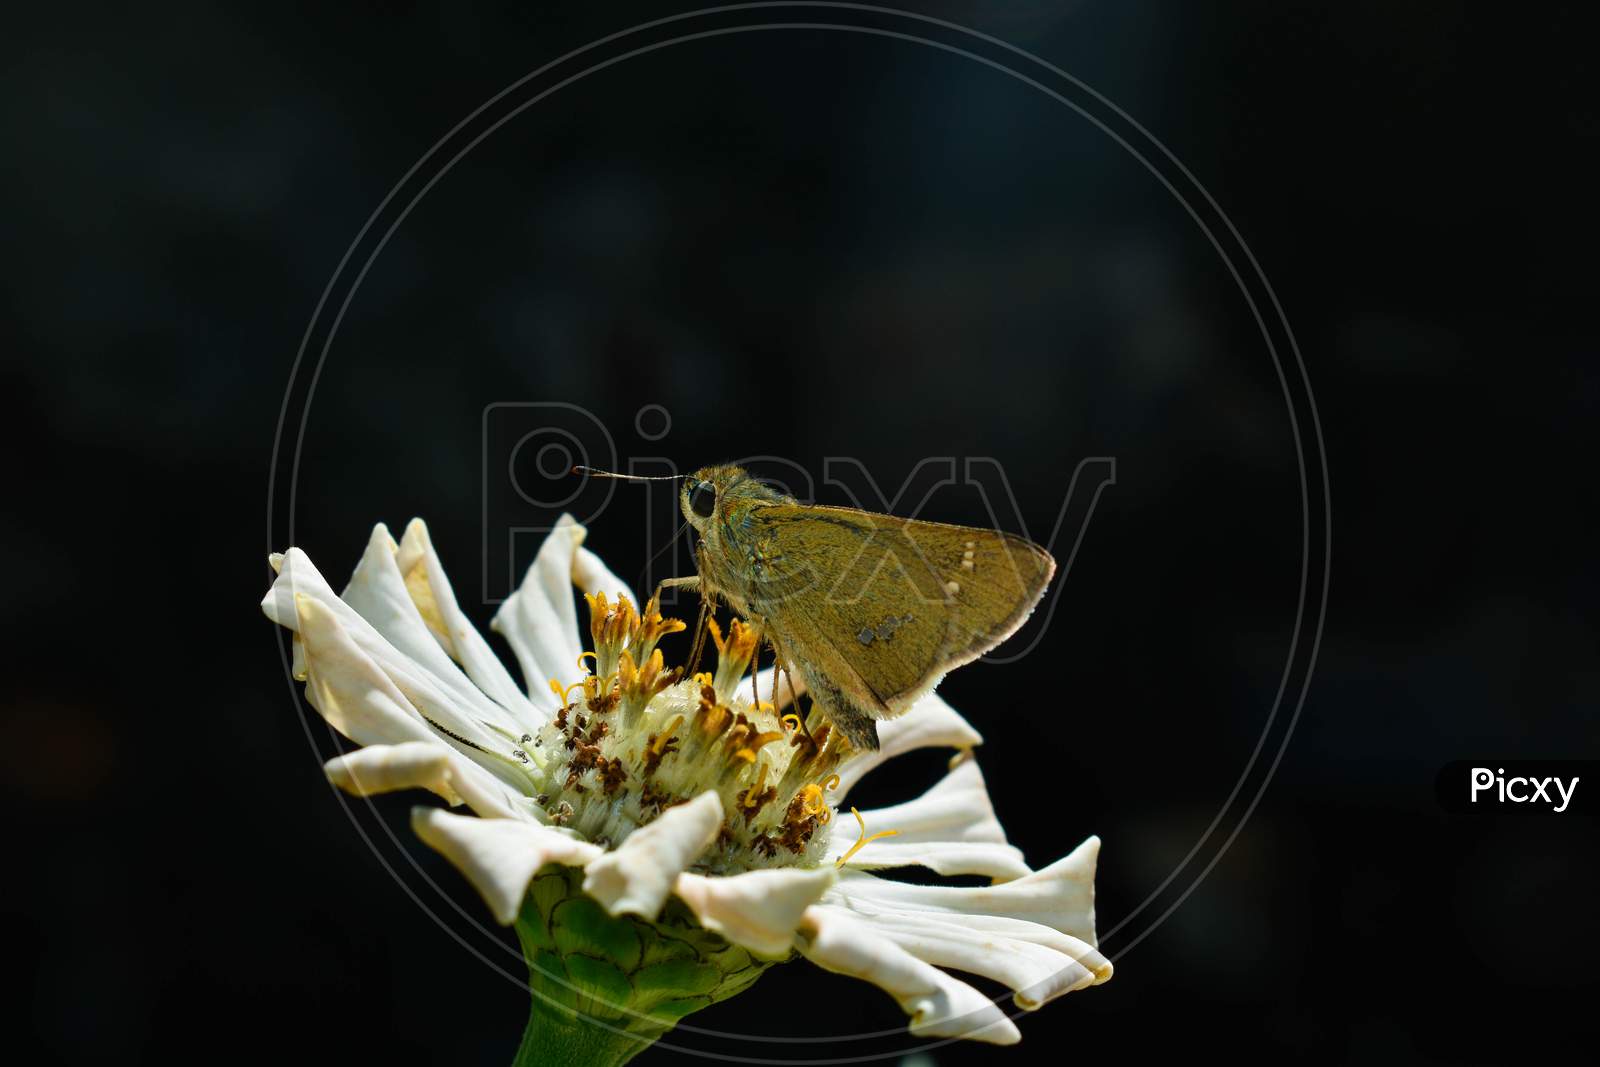 Close-up of Butterfly on white flower.